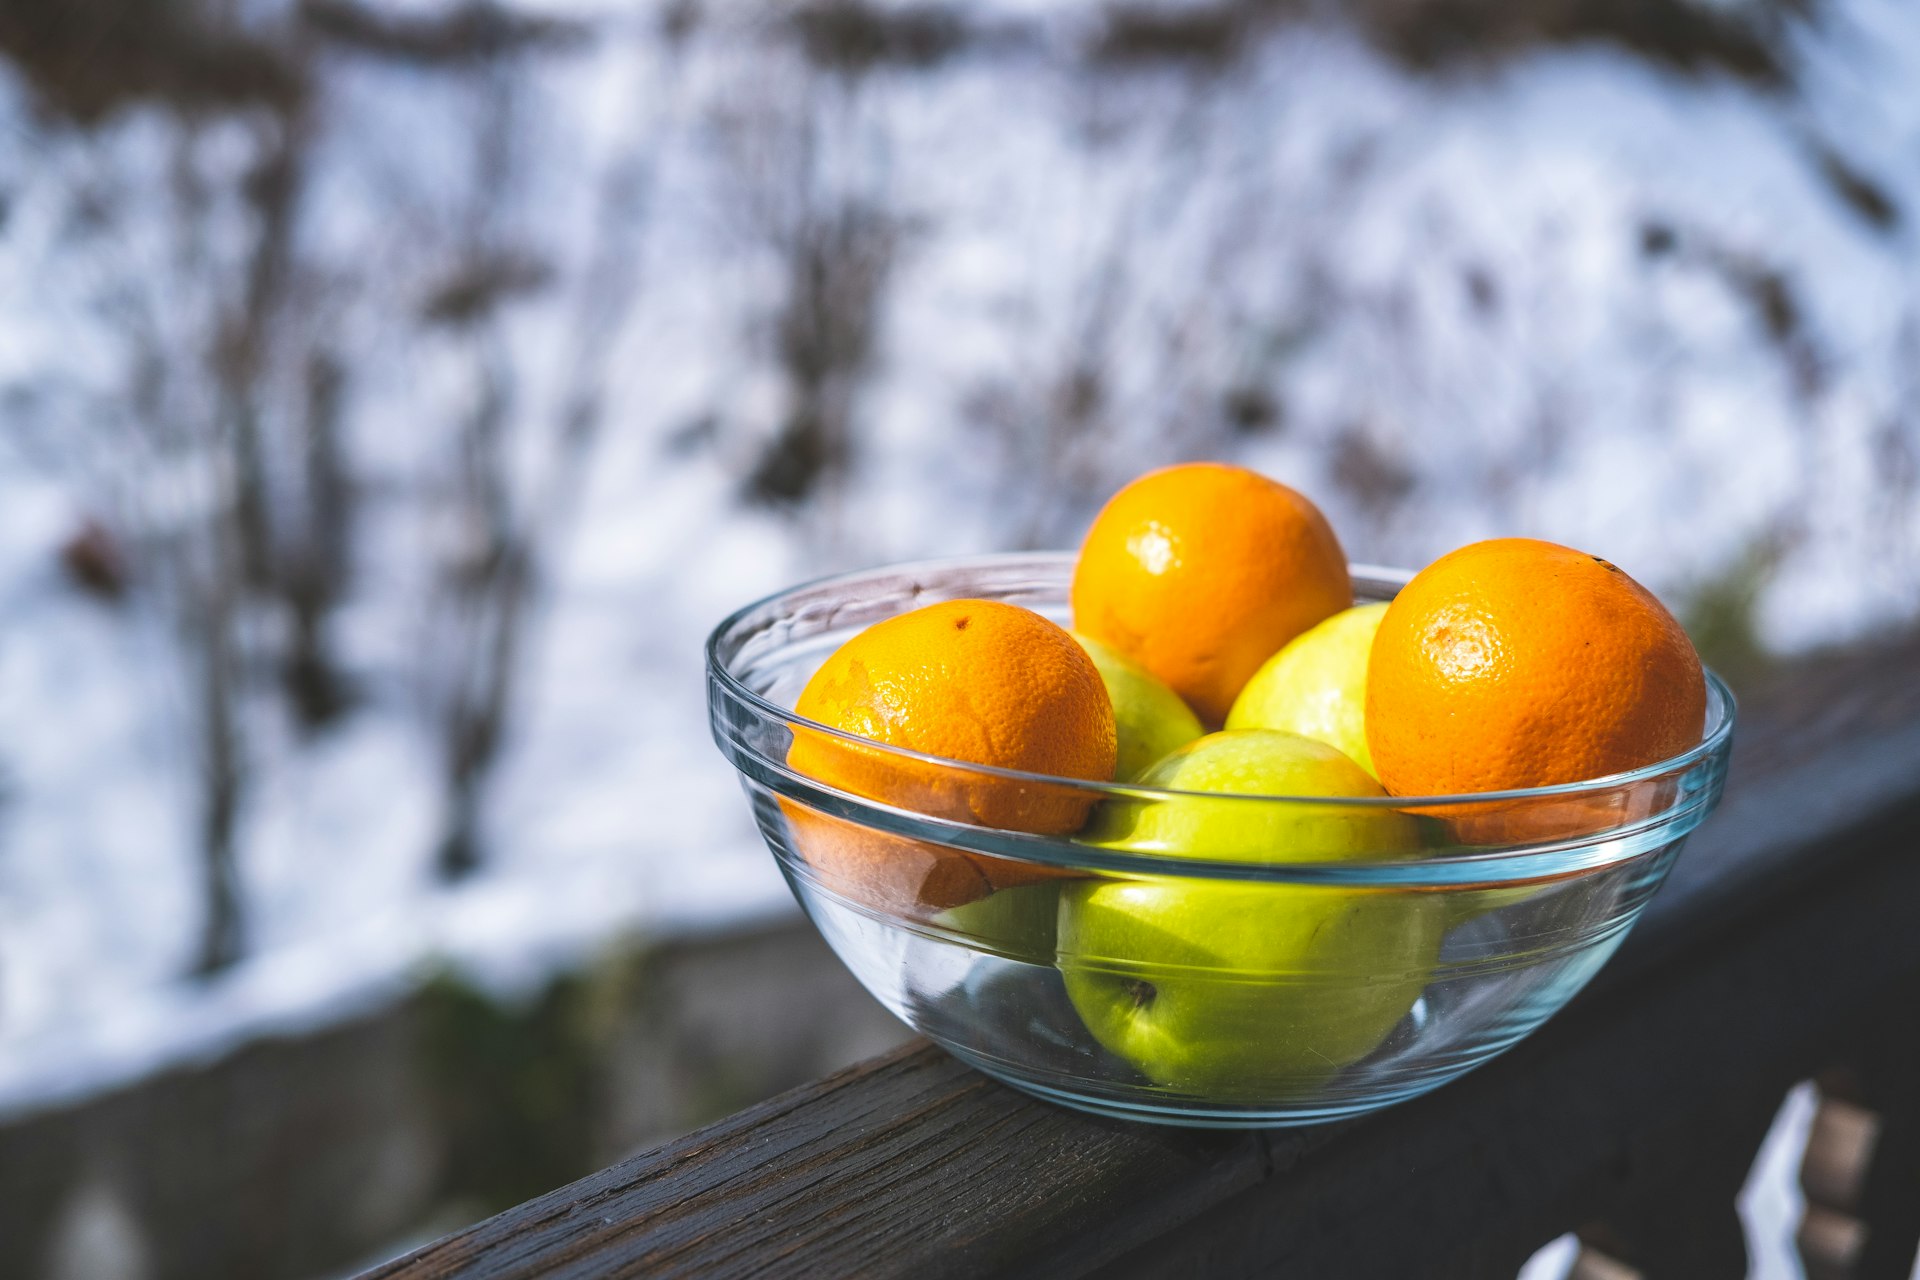 Apples and Oranges: Fruit and Theology